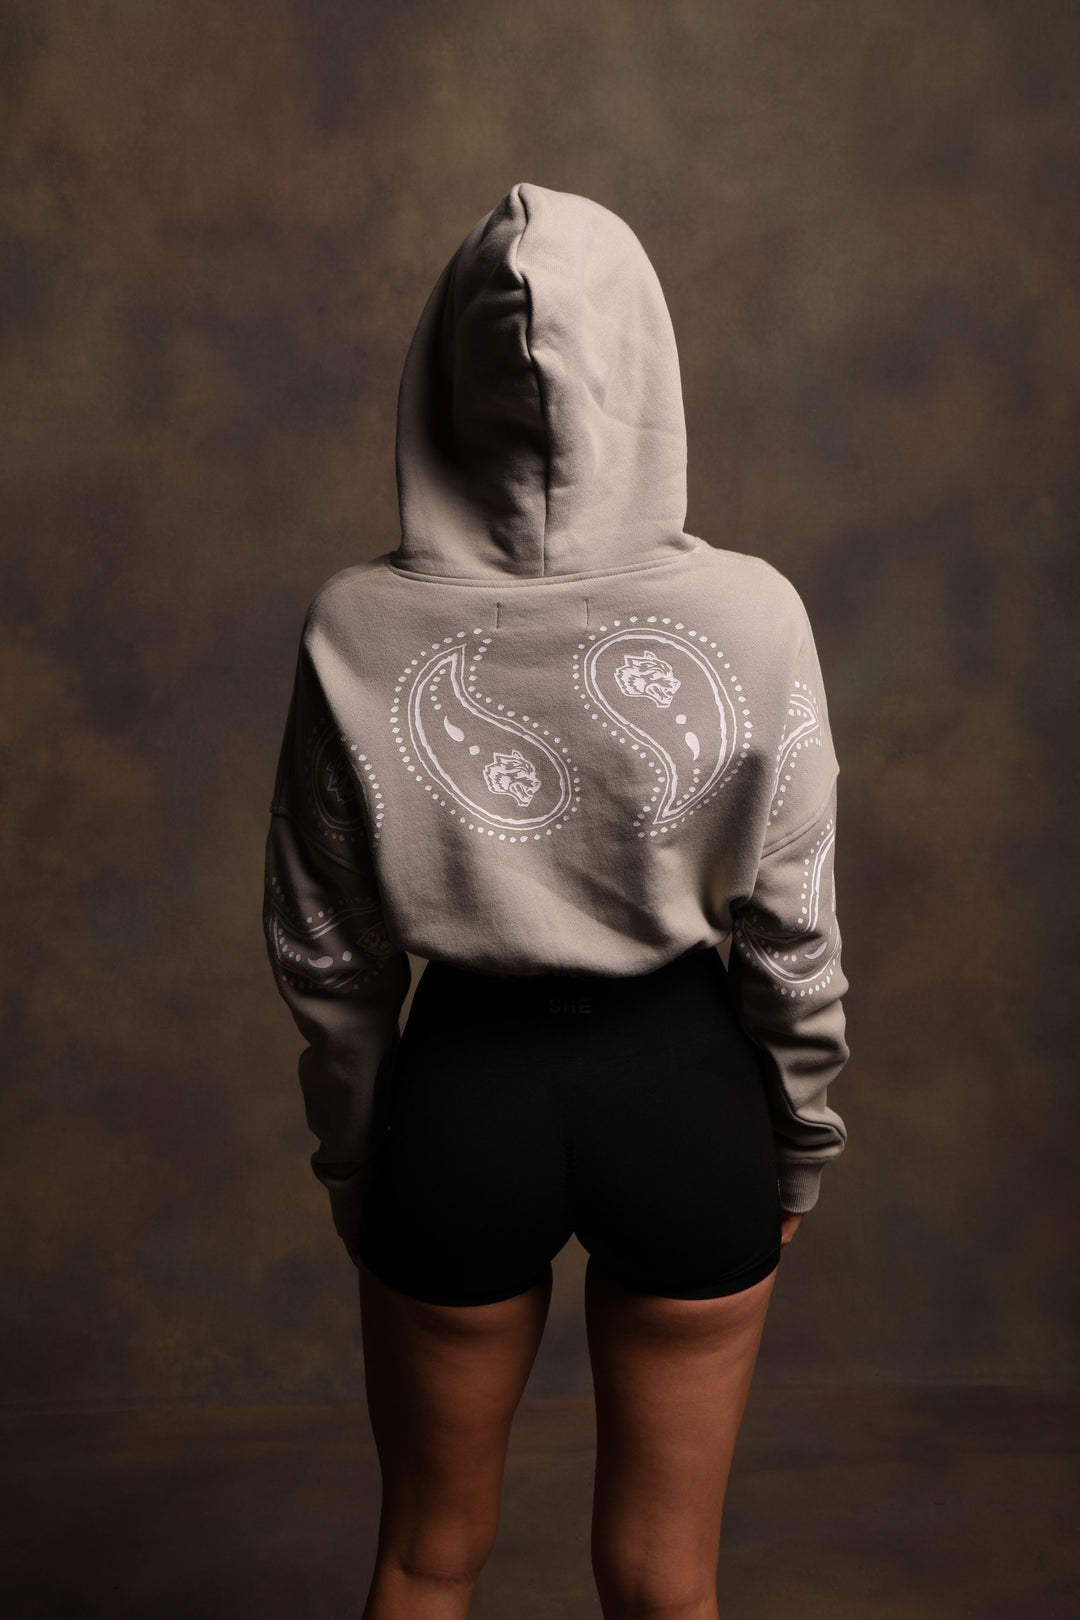 Southwest Paisley "McCauley" (Cropped) Hoodie in Cactus Gray